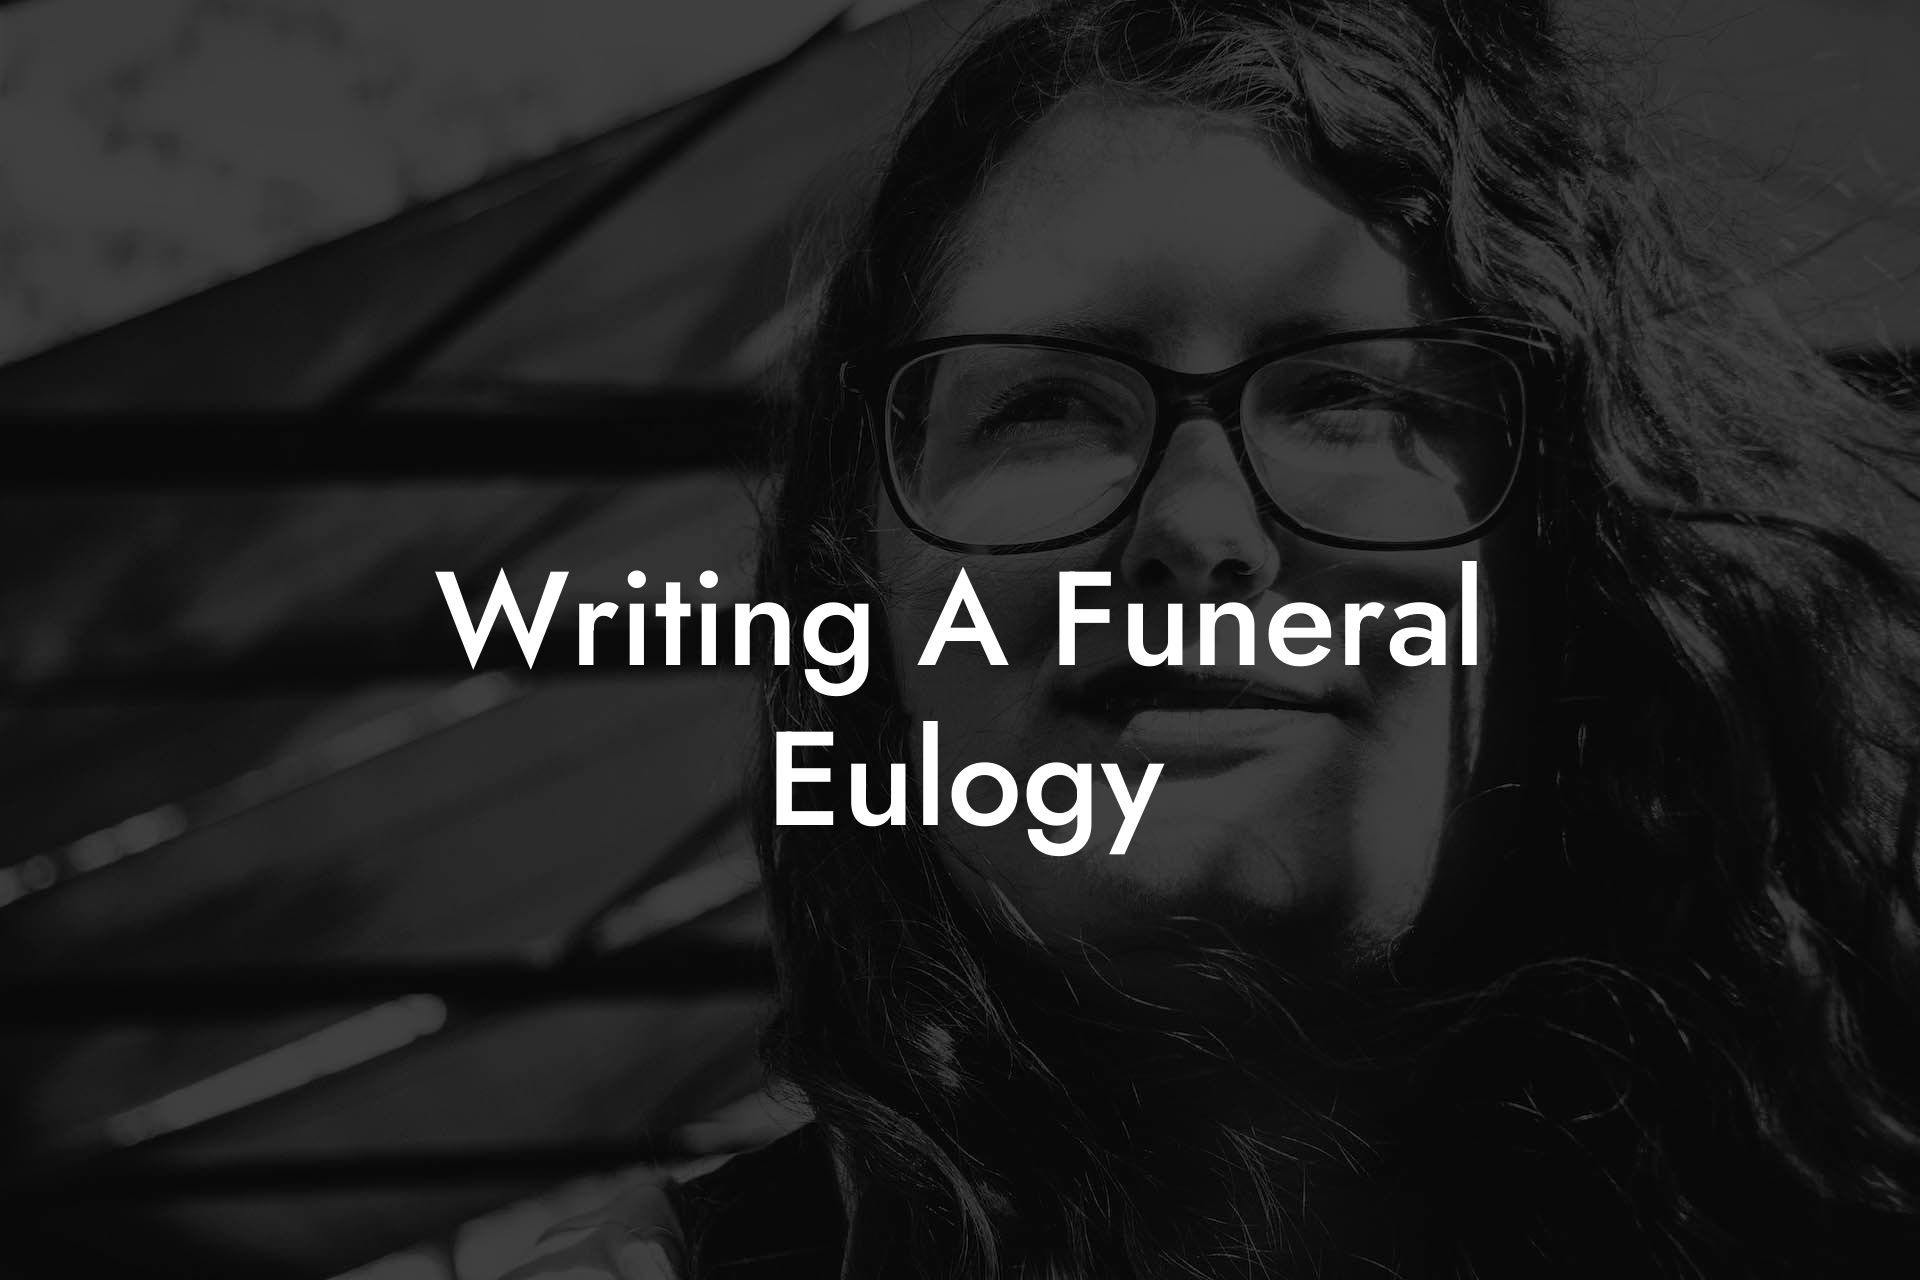 Writing A Funeral Eulogy